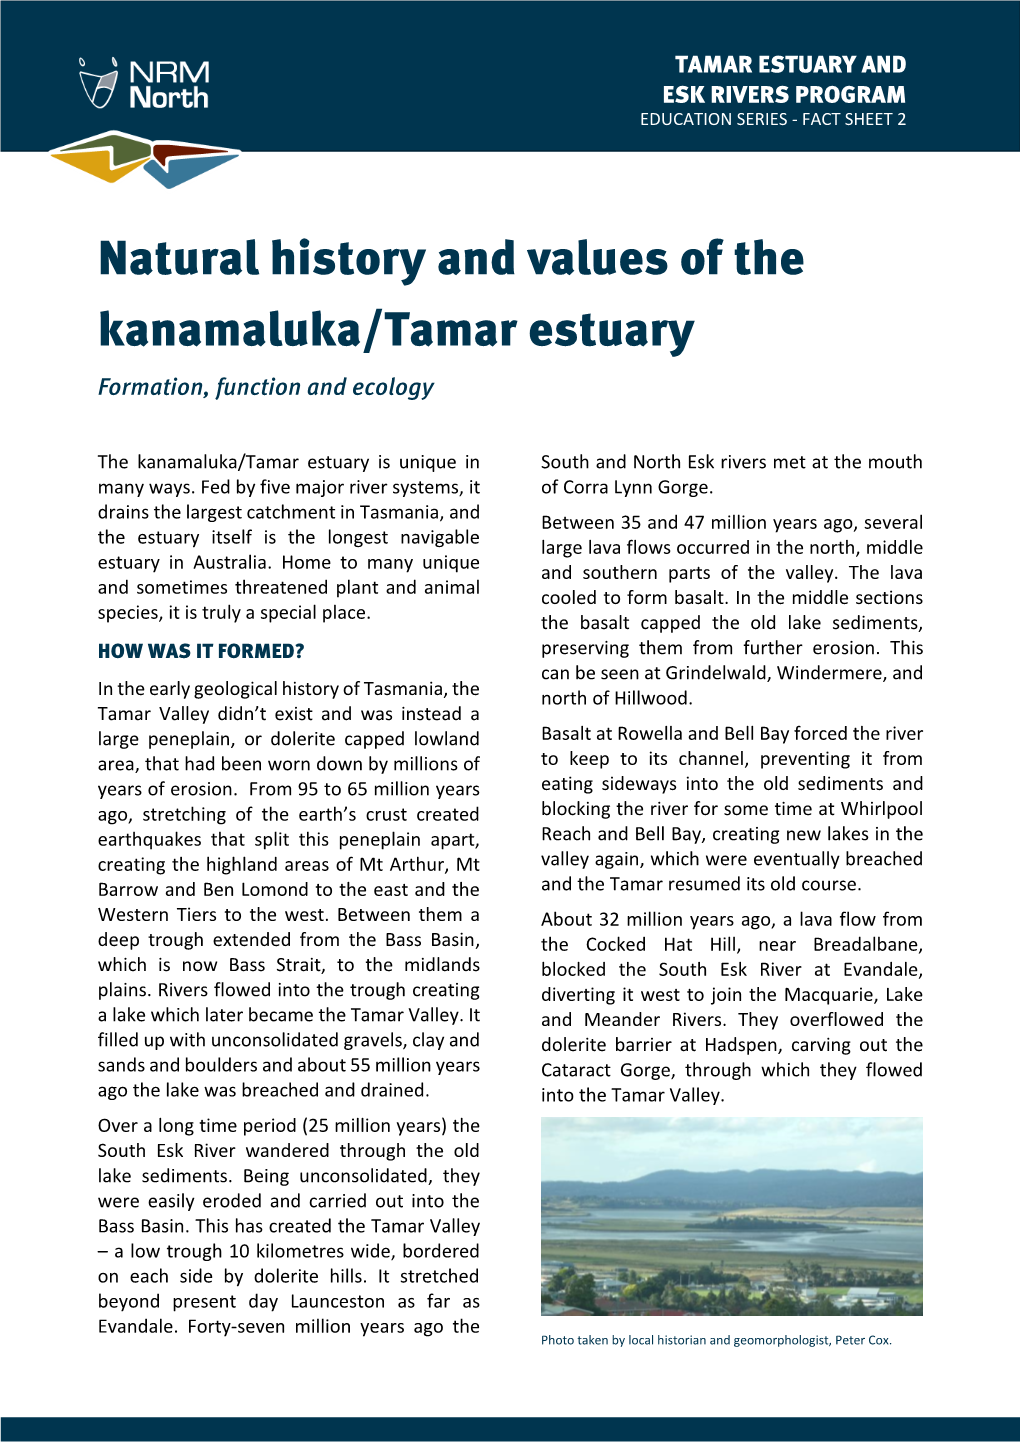 Natural History and Values of the Kanamaluka/Tamar Estuary Formation, Function and Ecology